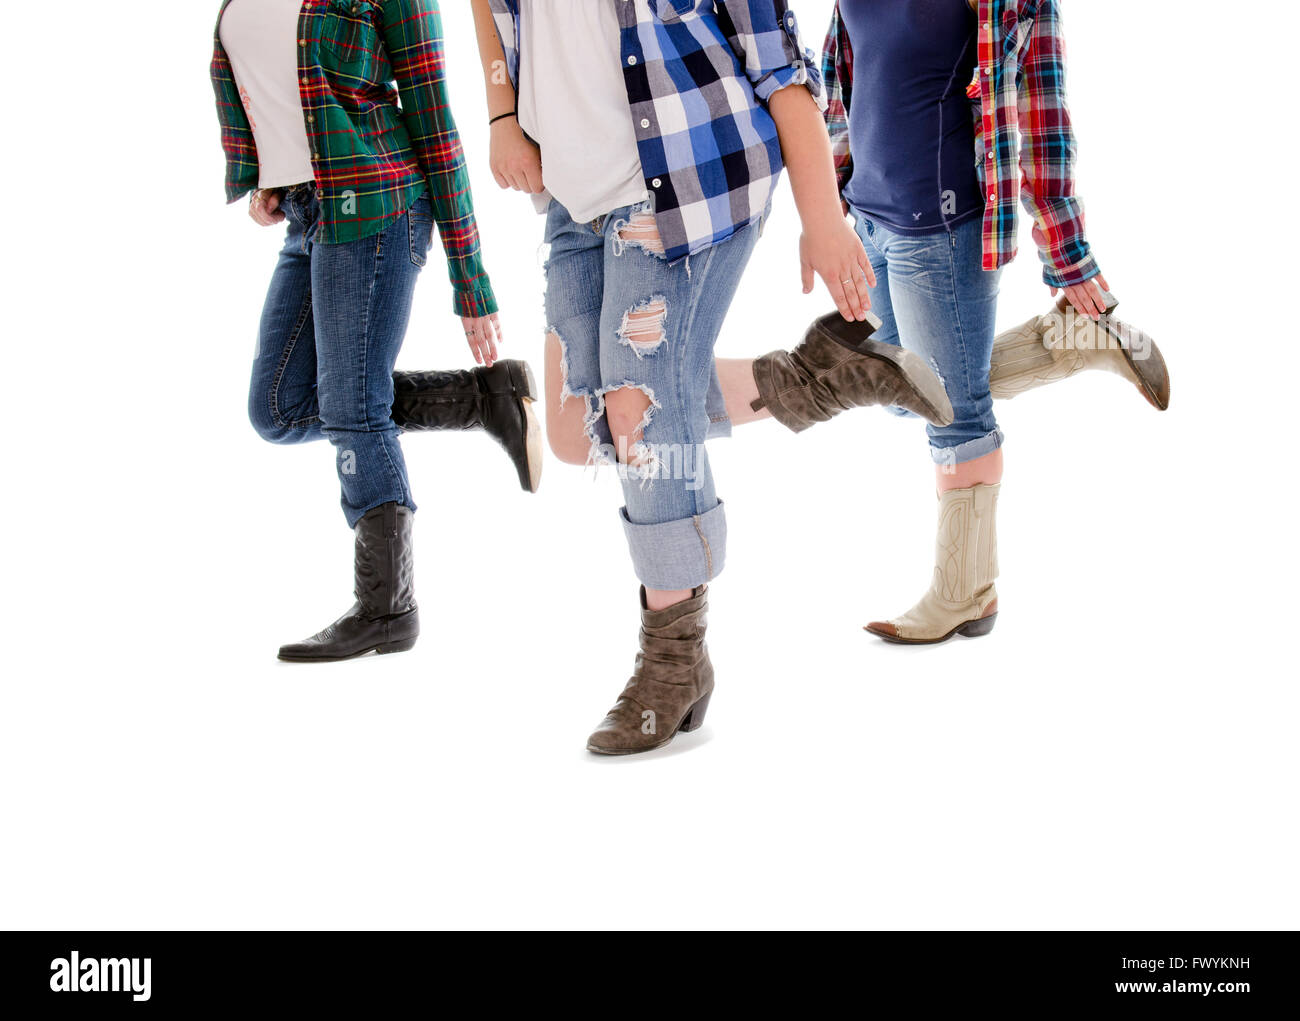 Legs of three women performing a line dance in cowboy boots and jeans. Stock Photo